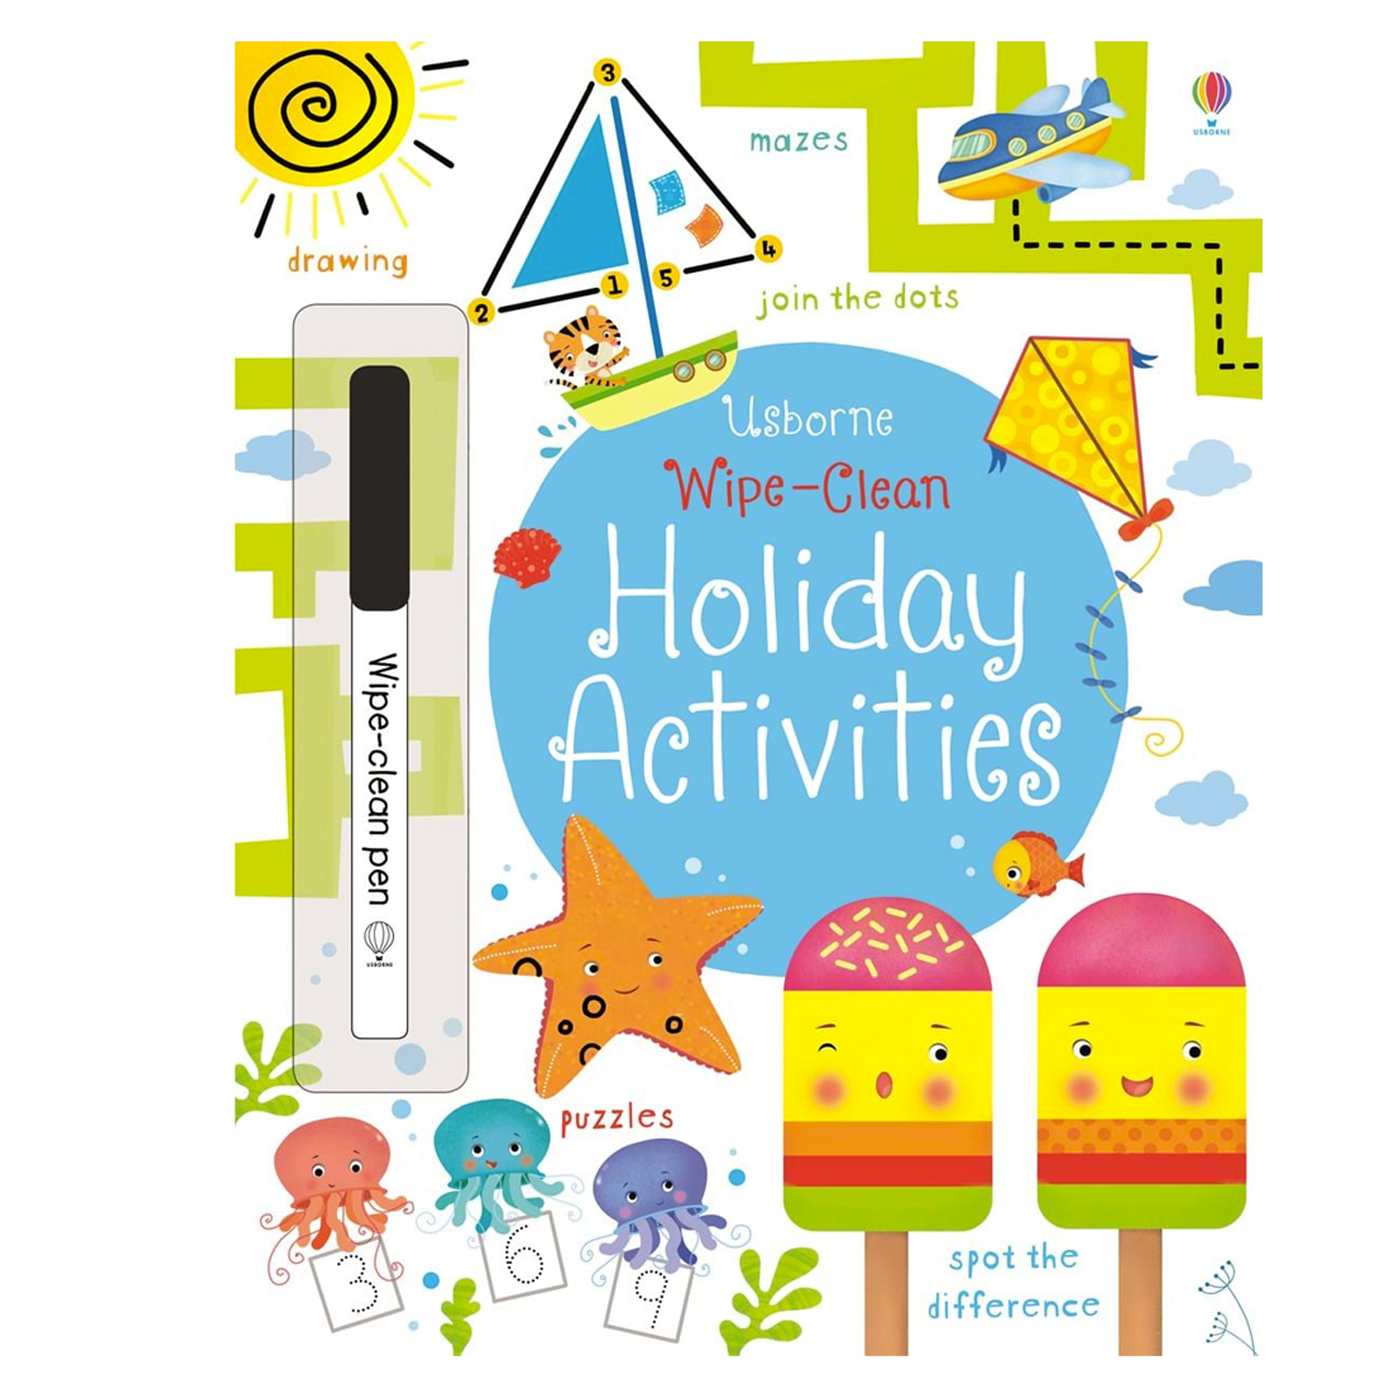  Wipe-Clean Holiday Activities